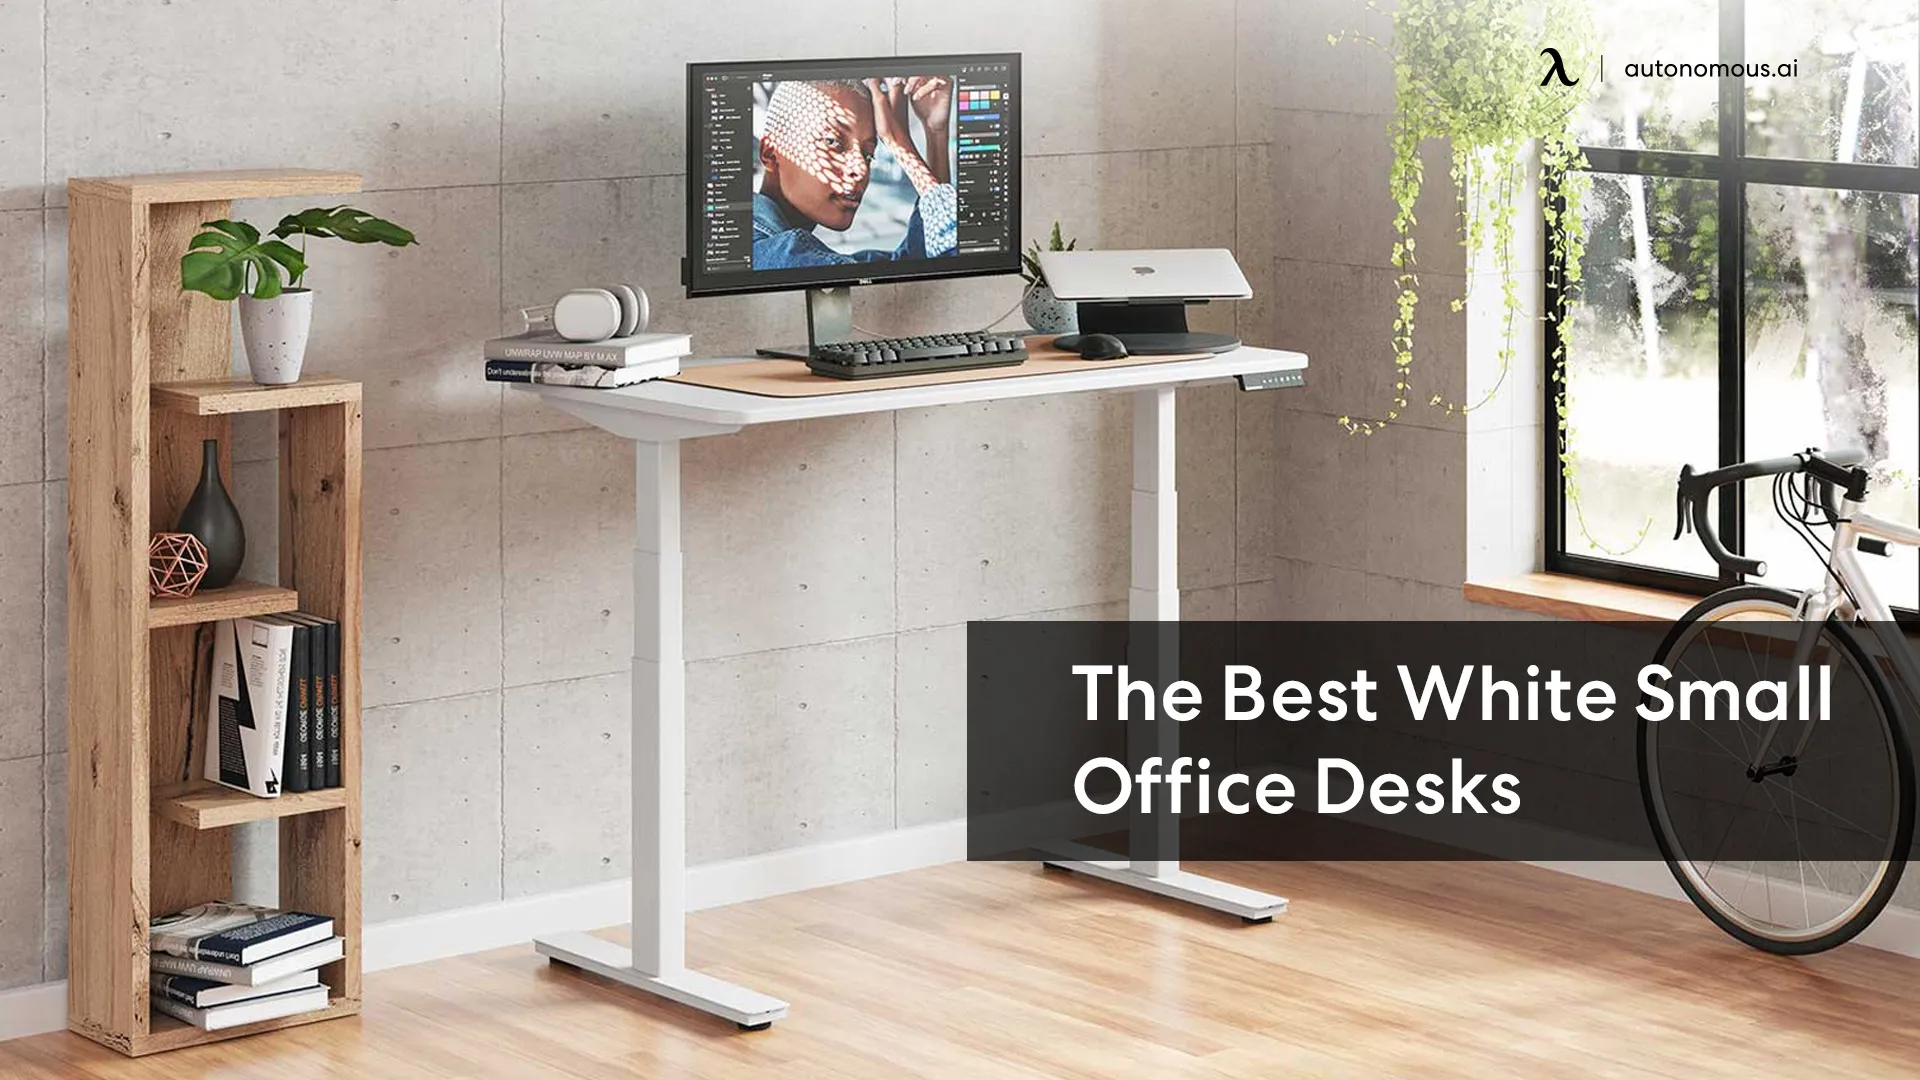 The 5 Best White Small Office Desks for Every Use